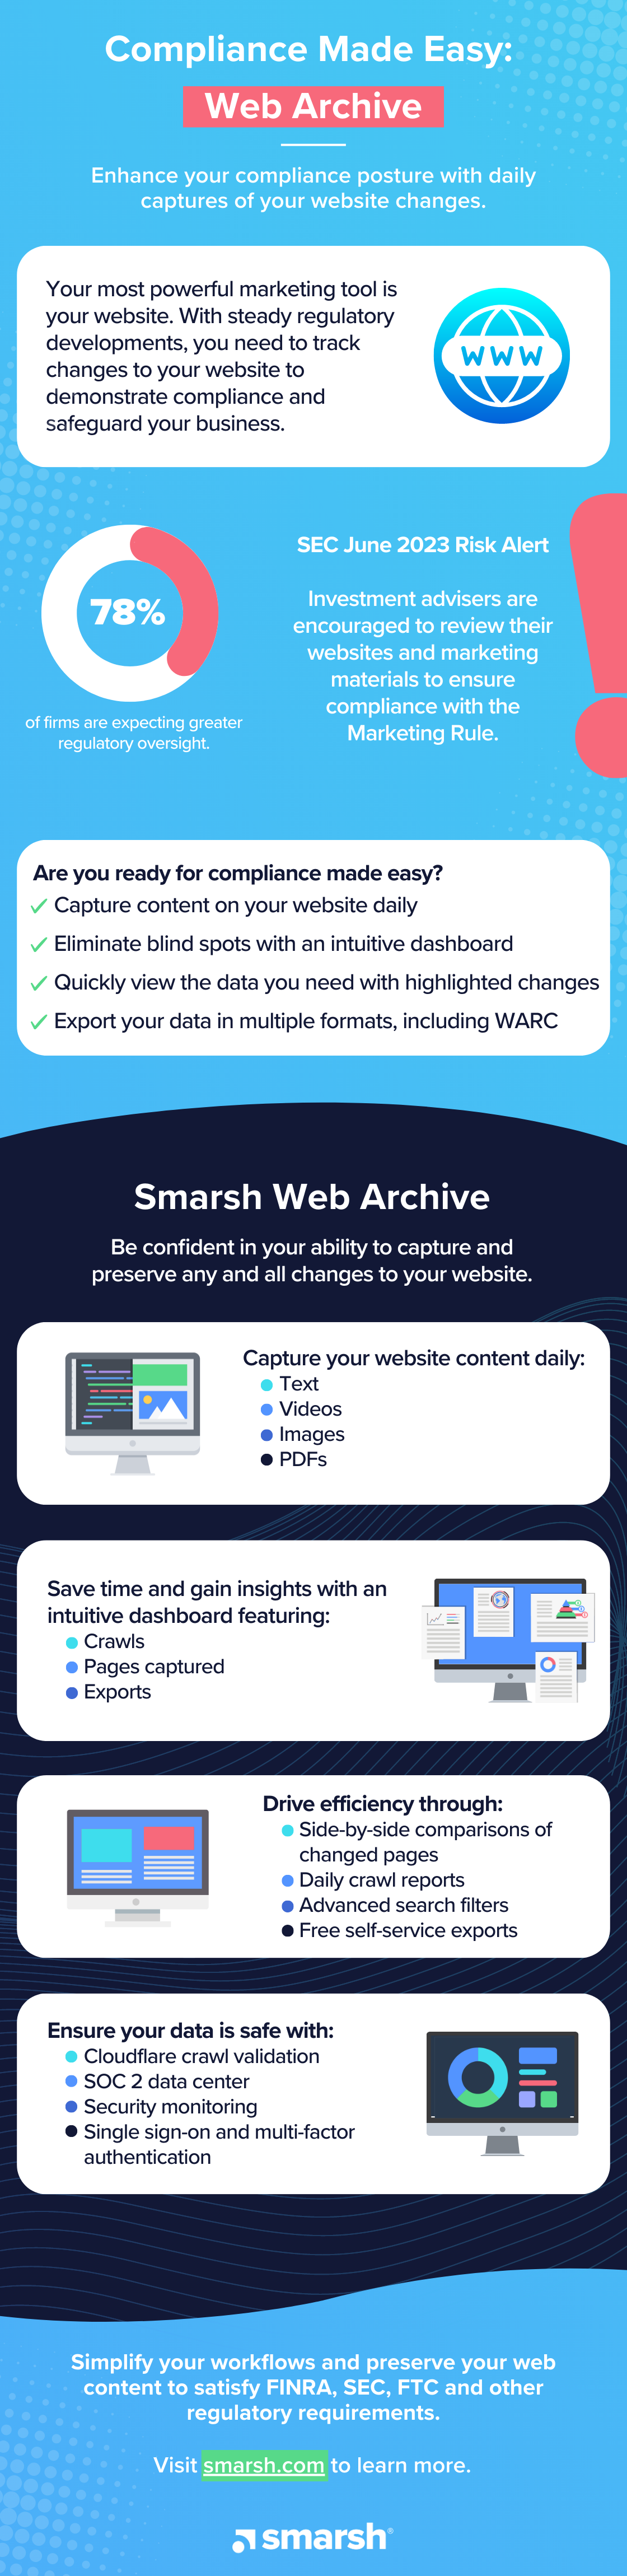 2023 infographic compliance made easy web archive